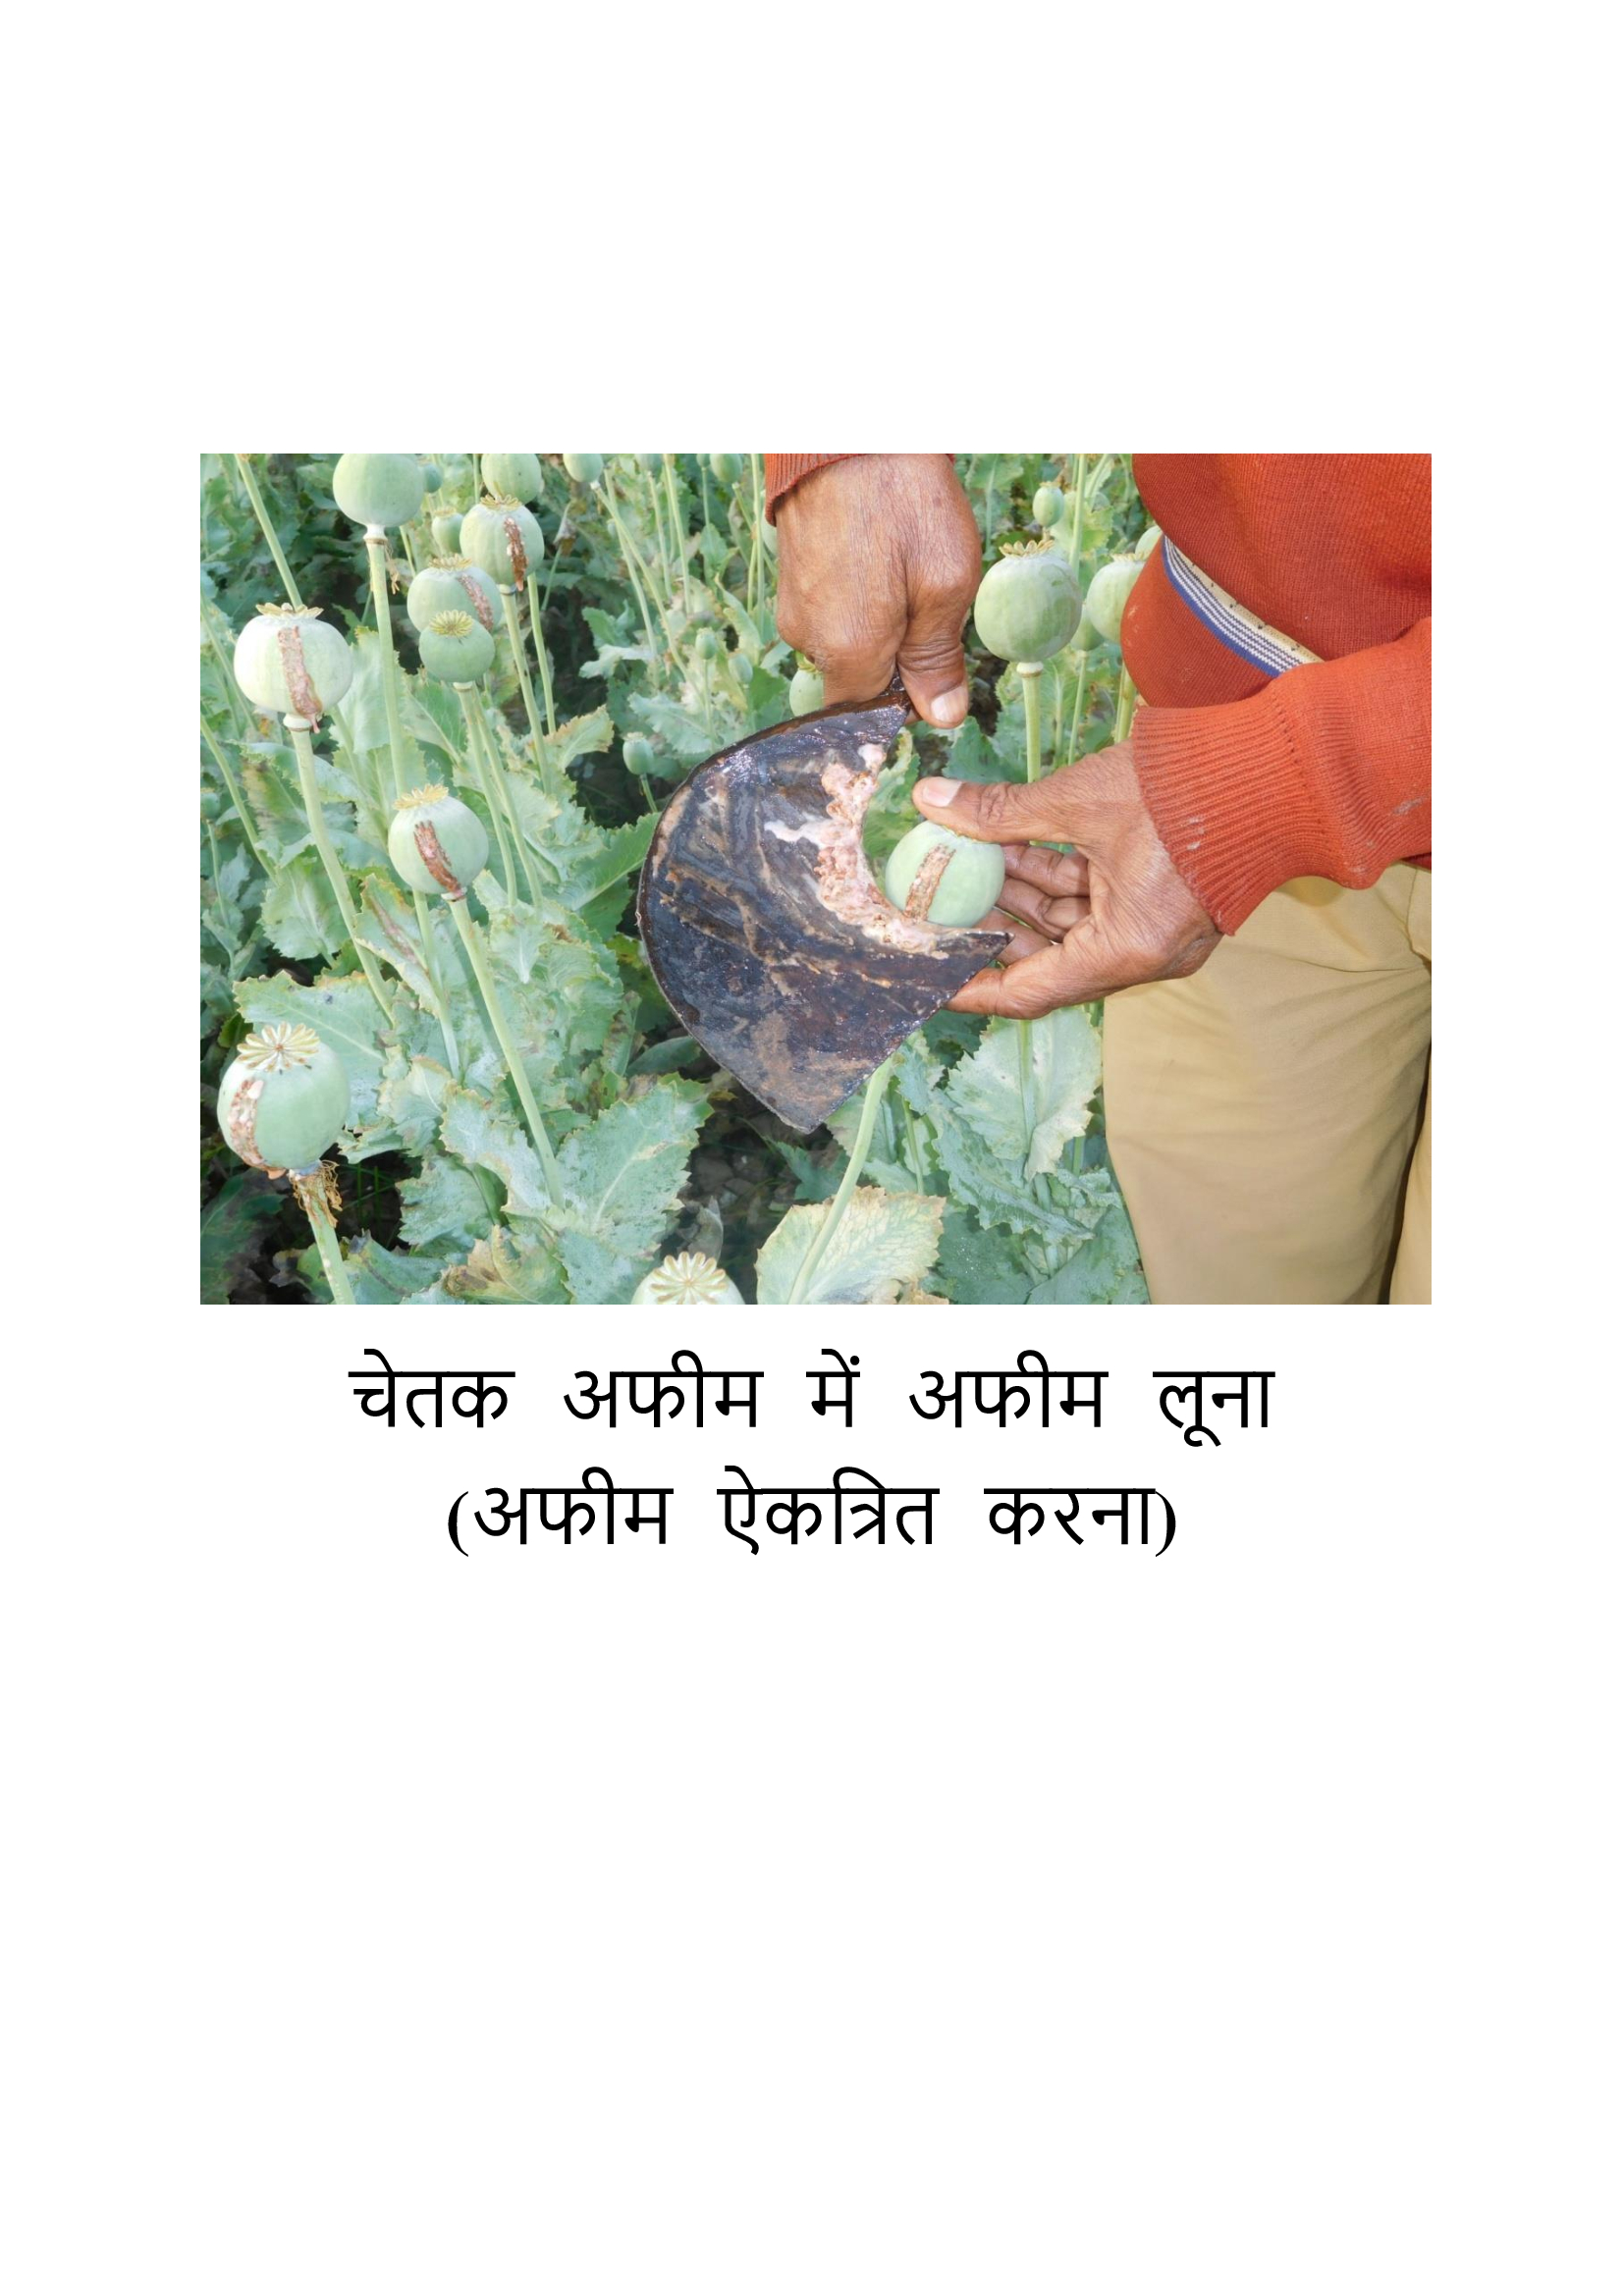 New Variety of Opium 'Chetak' Developed by MPUAT Agricultural Scientists